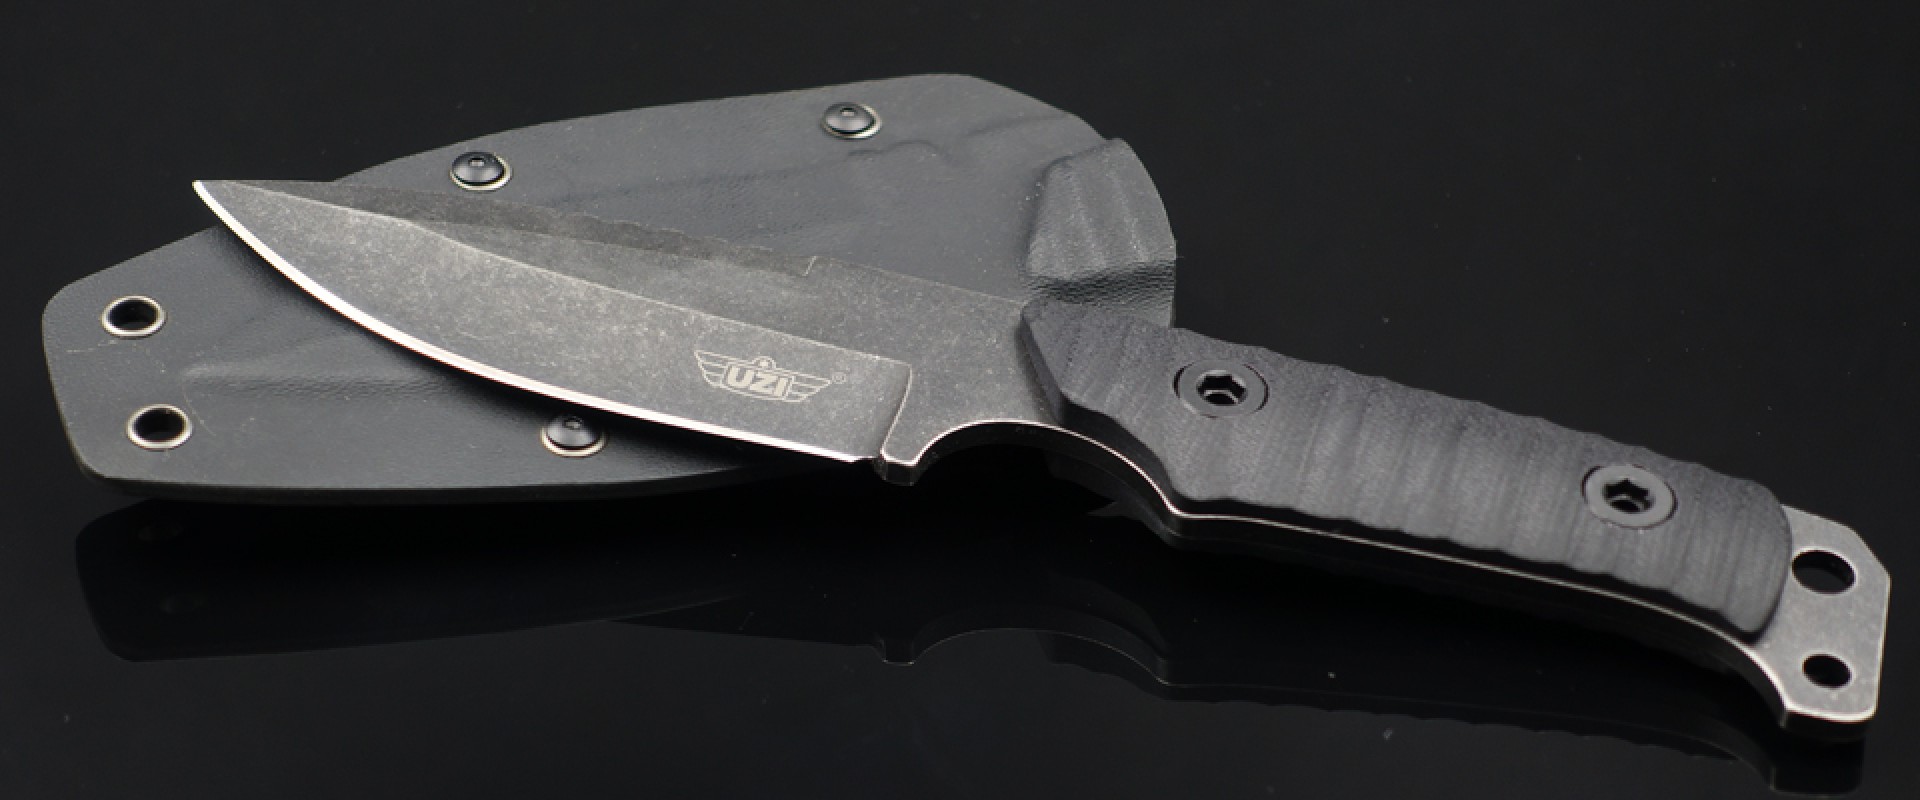 UZI Shomer Fixed Blade FXB009 with Kydex Sheath (Online Only)